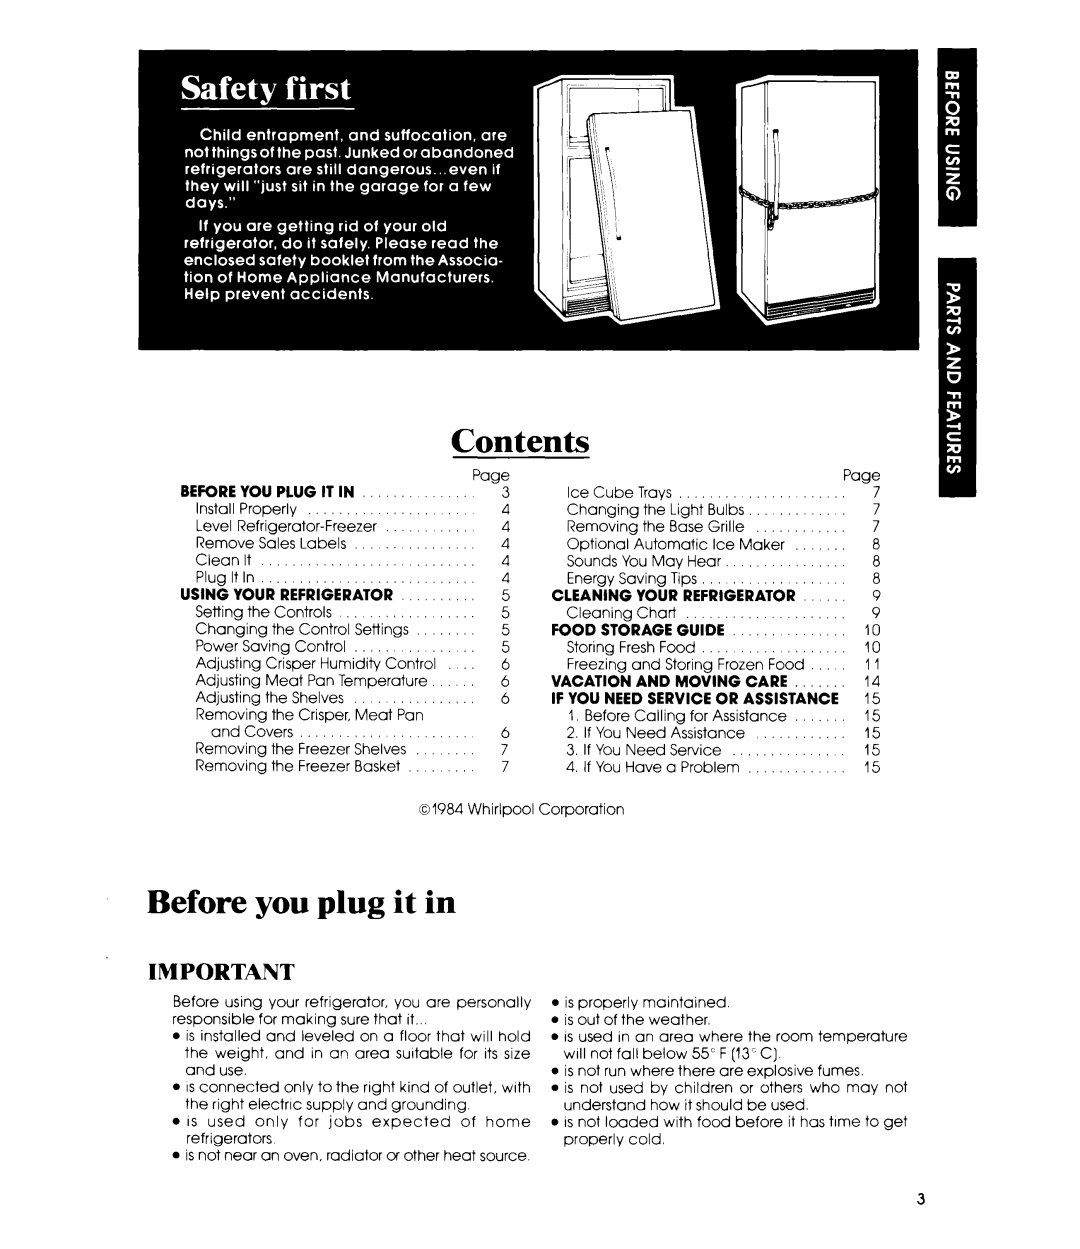 Whirlpool ED26MK manual Contents, Before you plug it in 